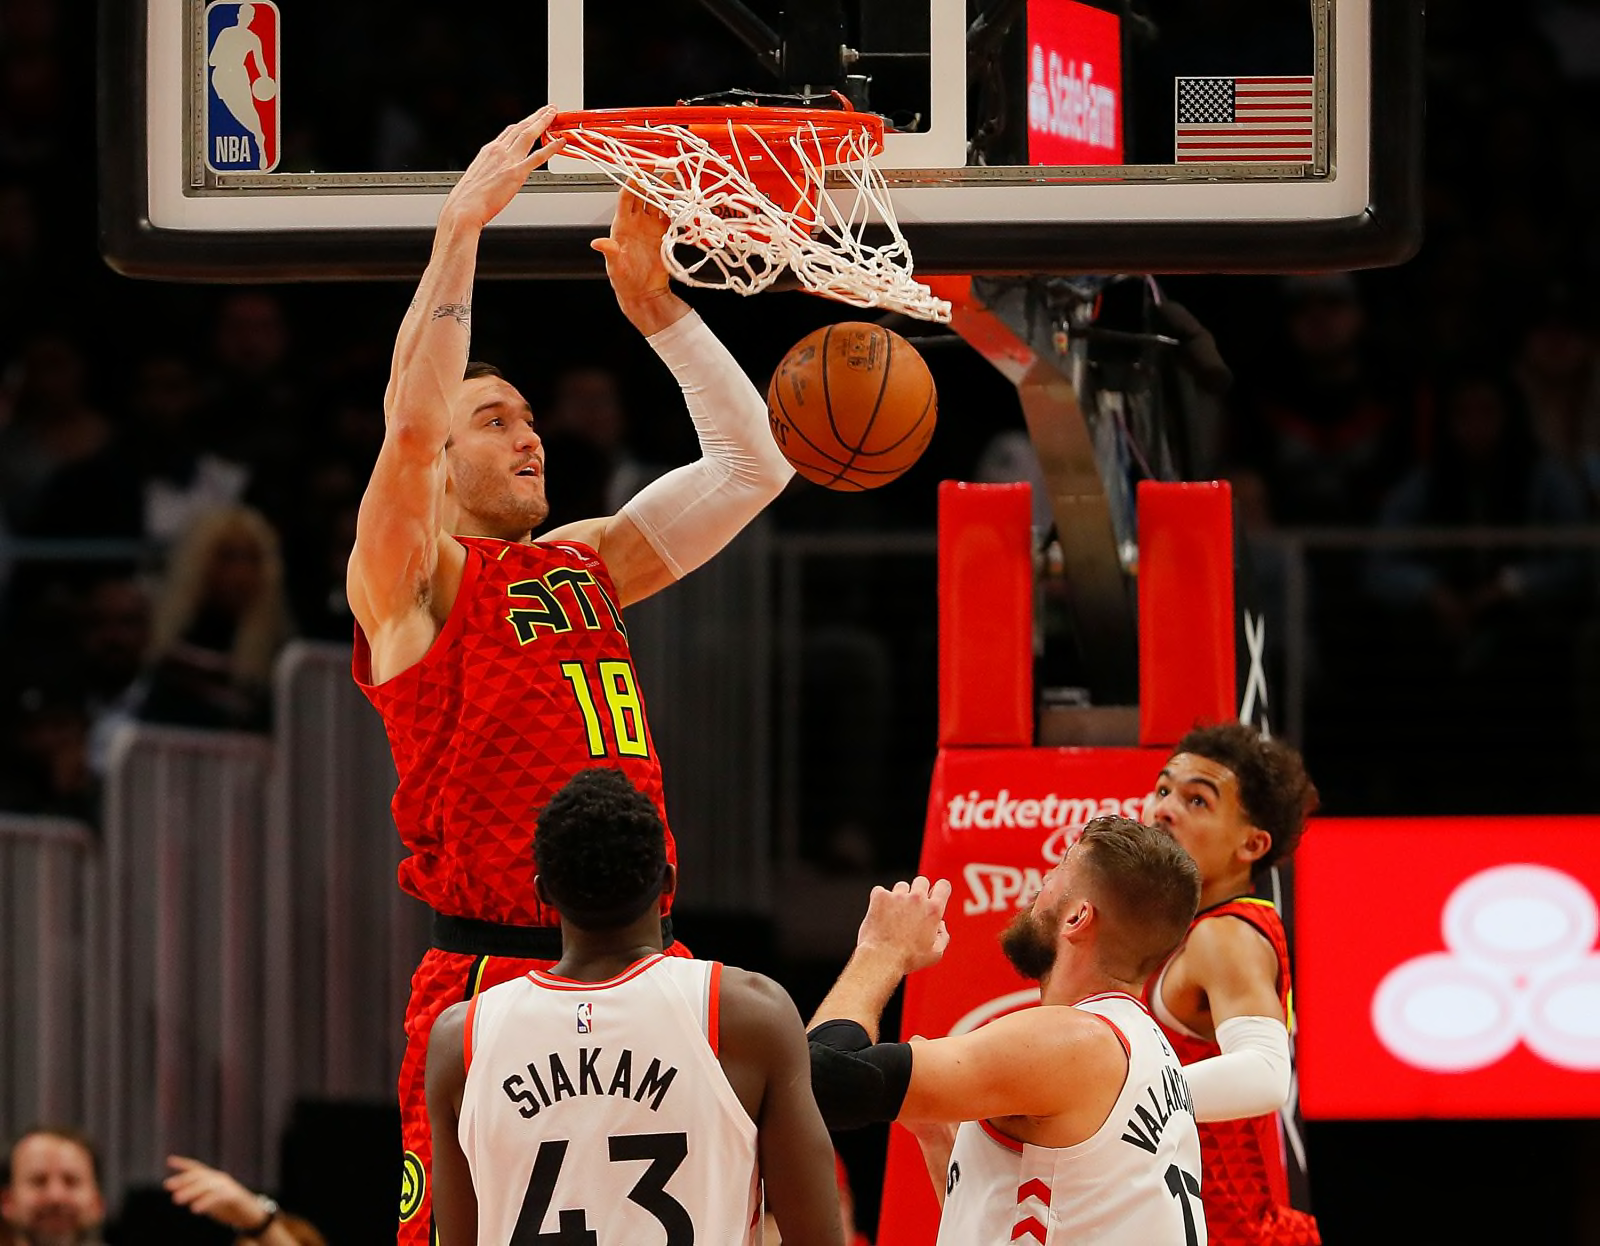 Chandler Parsons Rumors: Hawks Discussed Trade, Talks Haven't